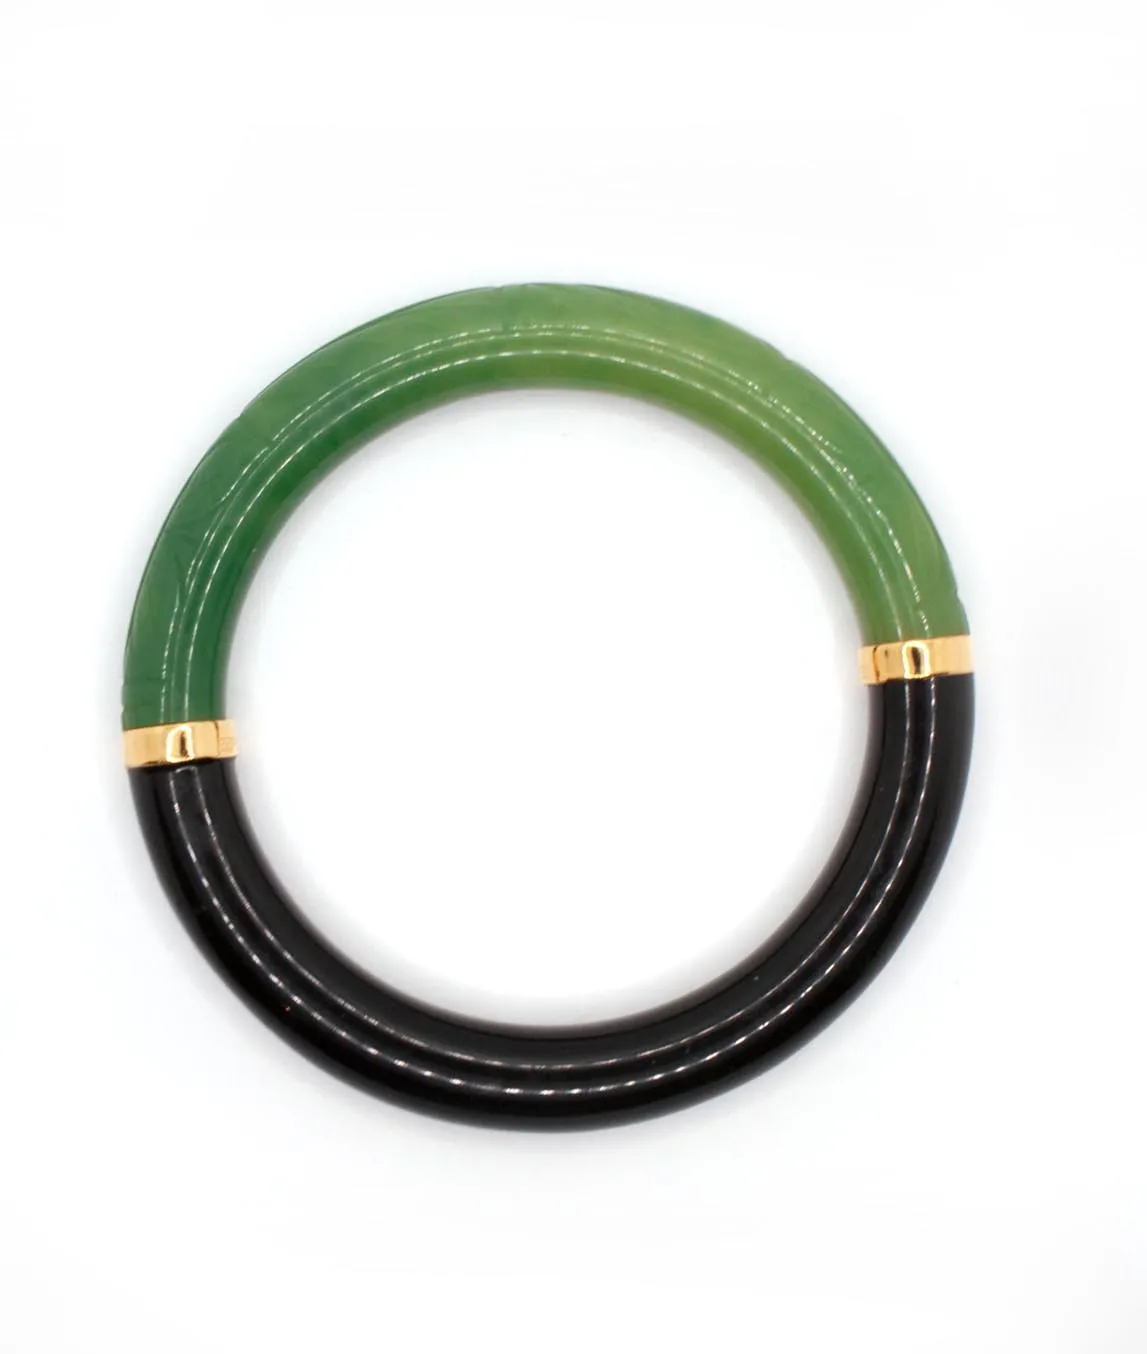 Givenchy green and black bangle with gold joins top view